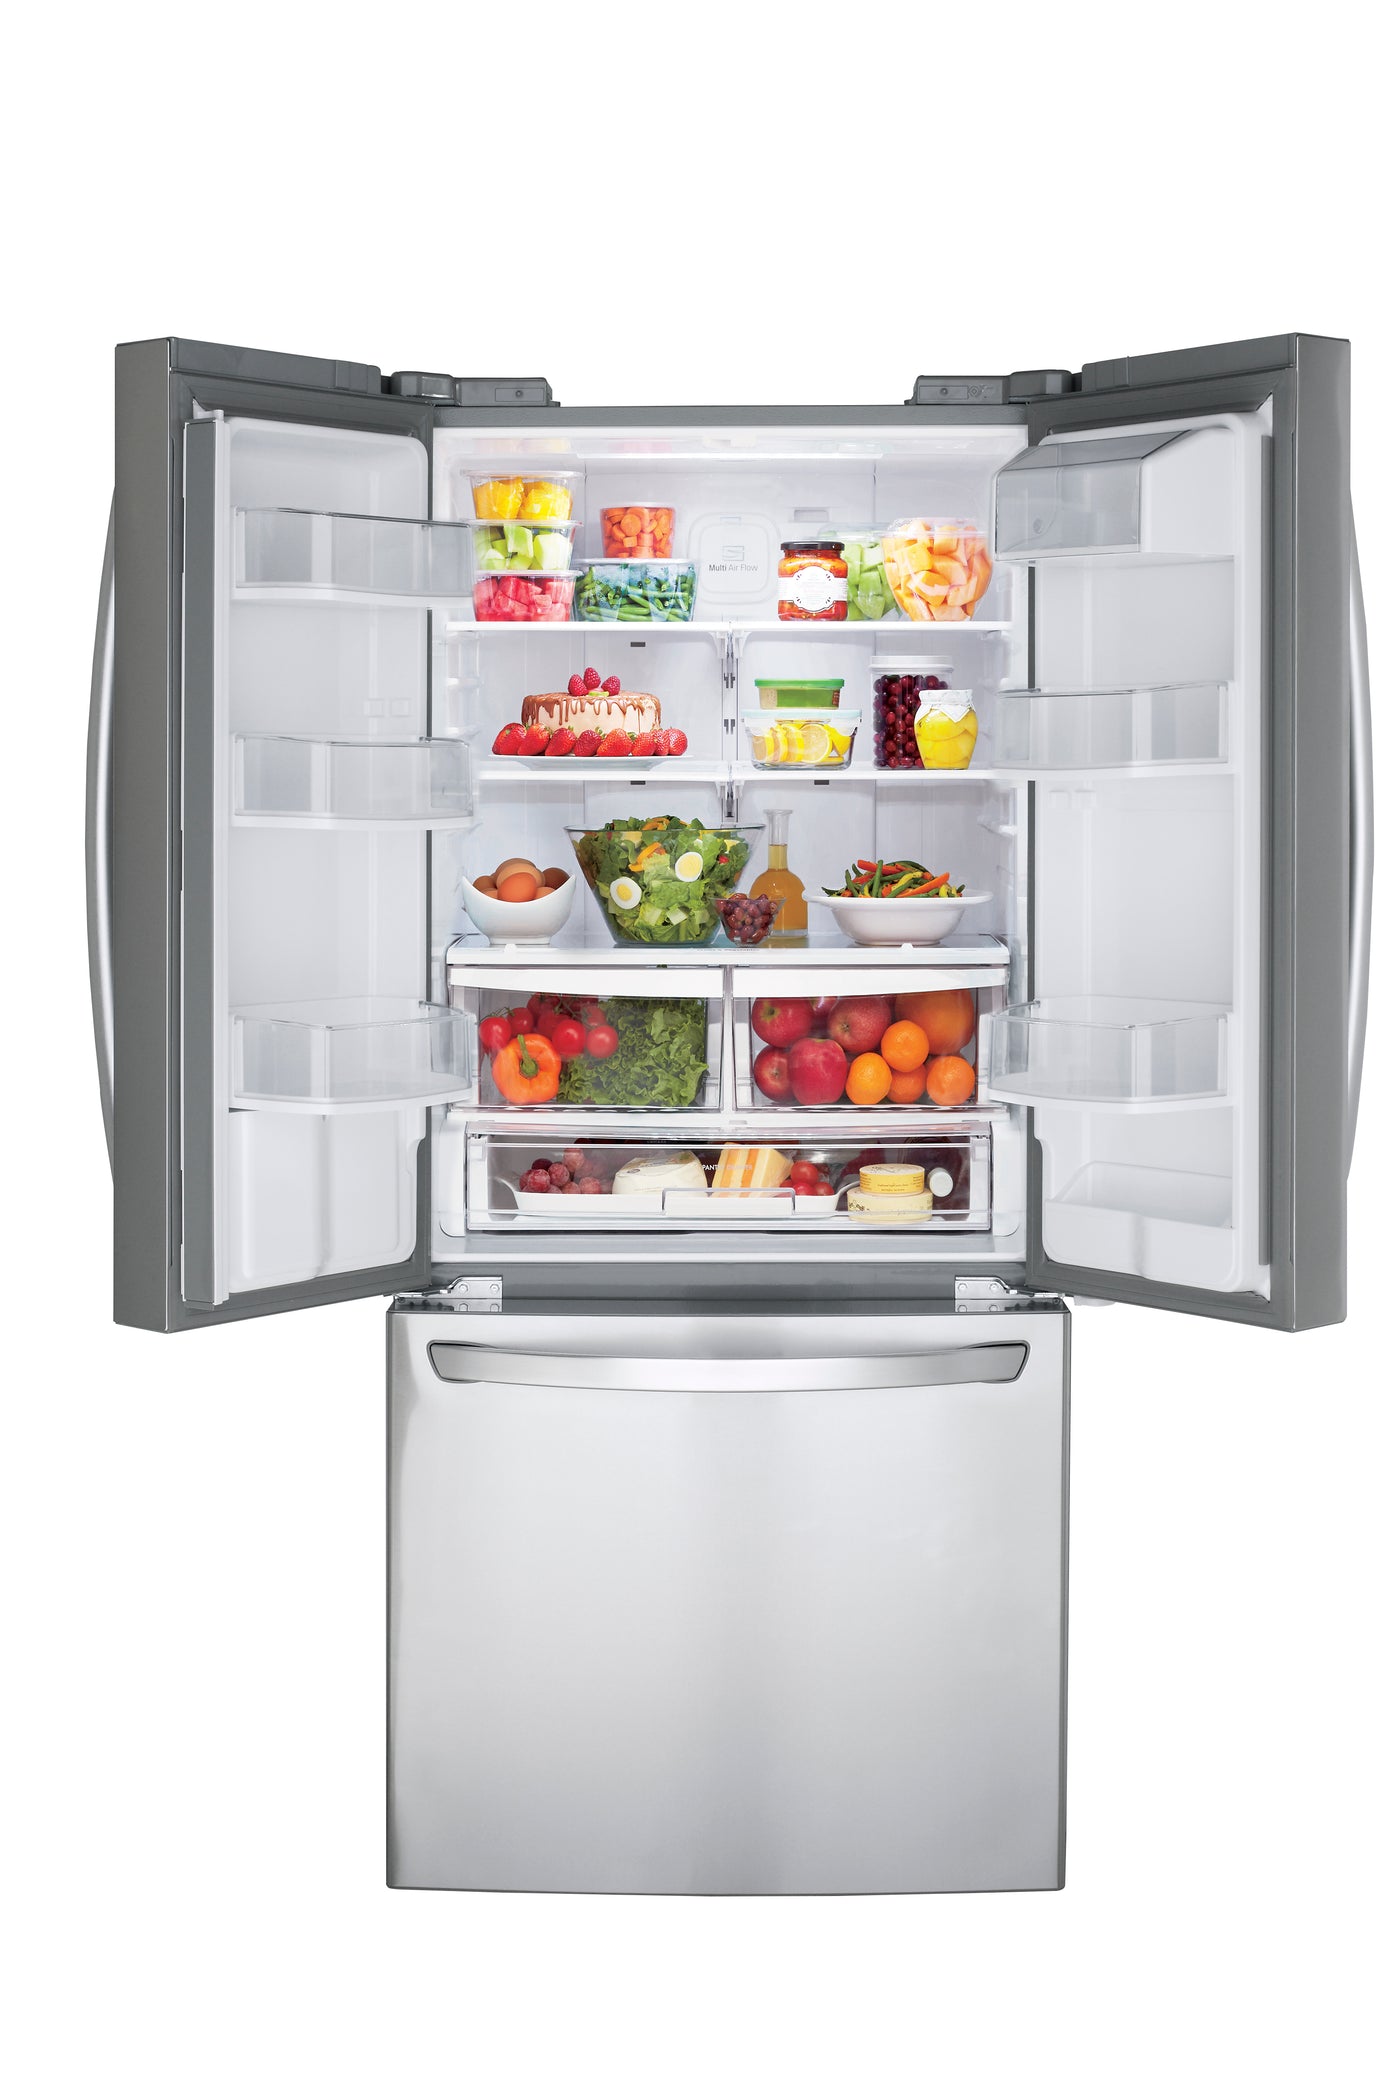 LG 30" Smudge Resistant Stainless Steel French Door Refrigerator with Water dispenser (22 cu. ft.) - LRFWS2200S